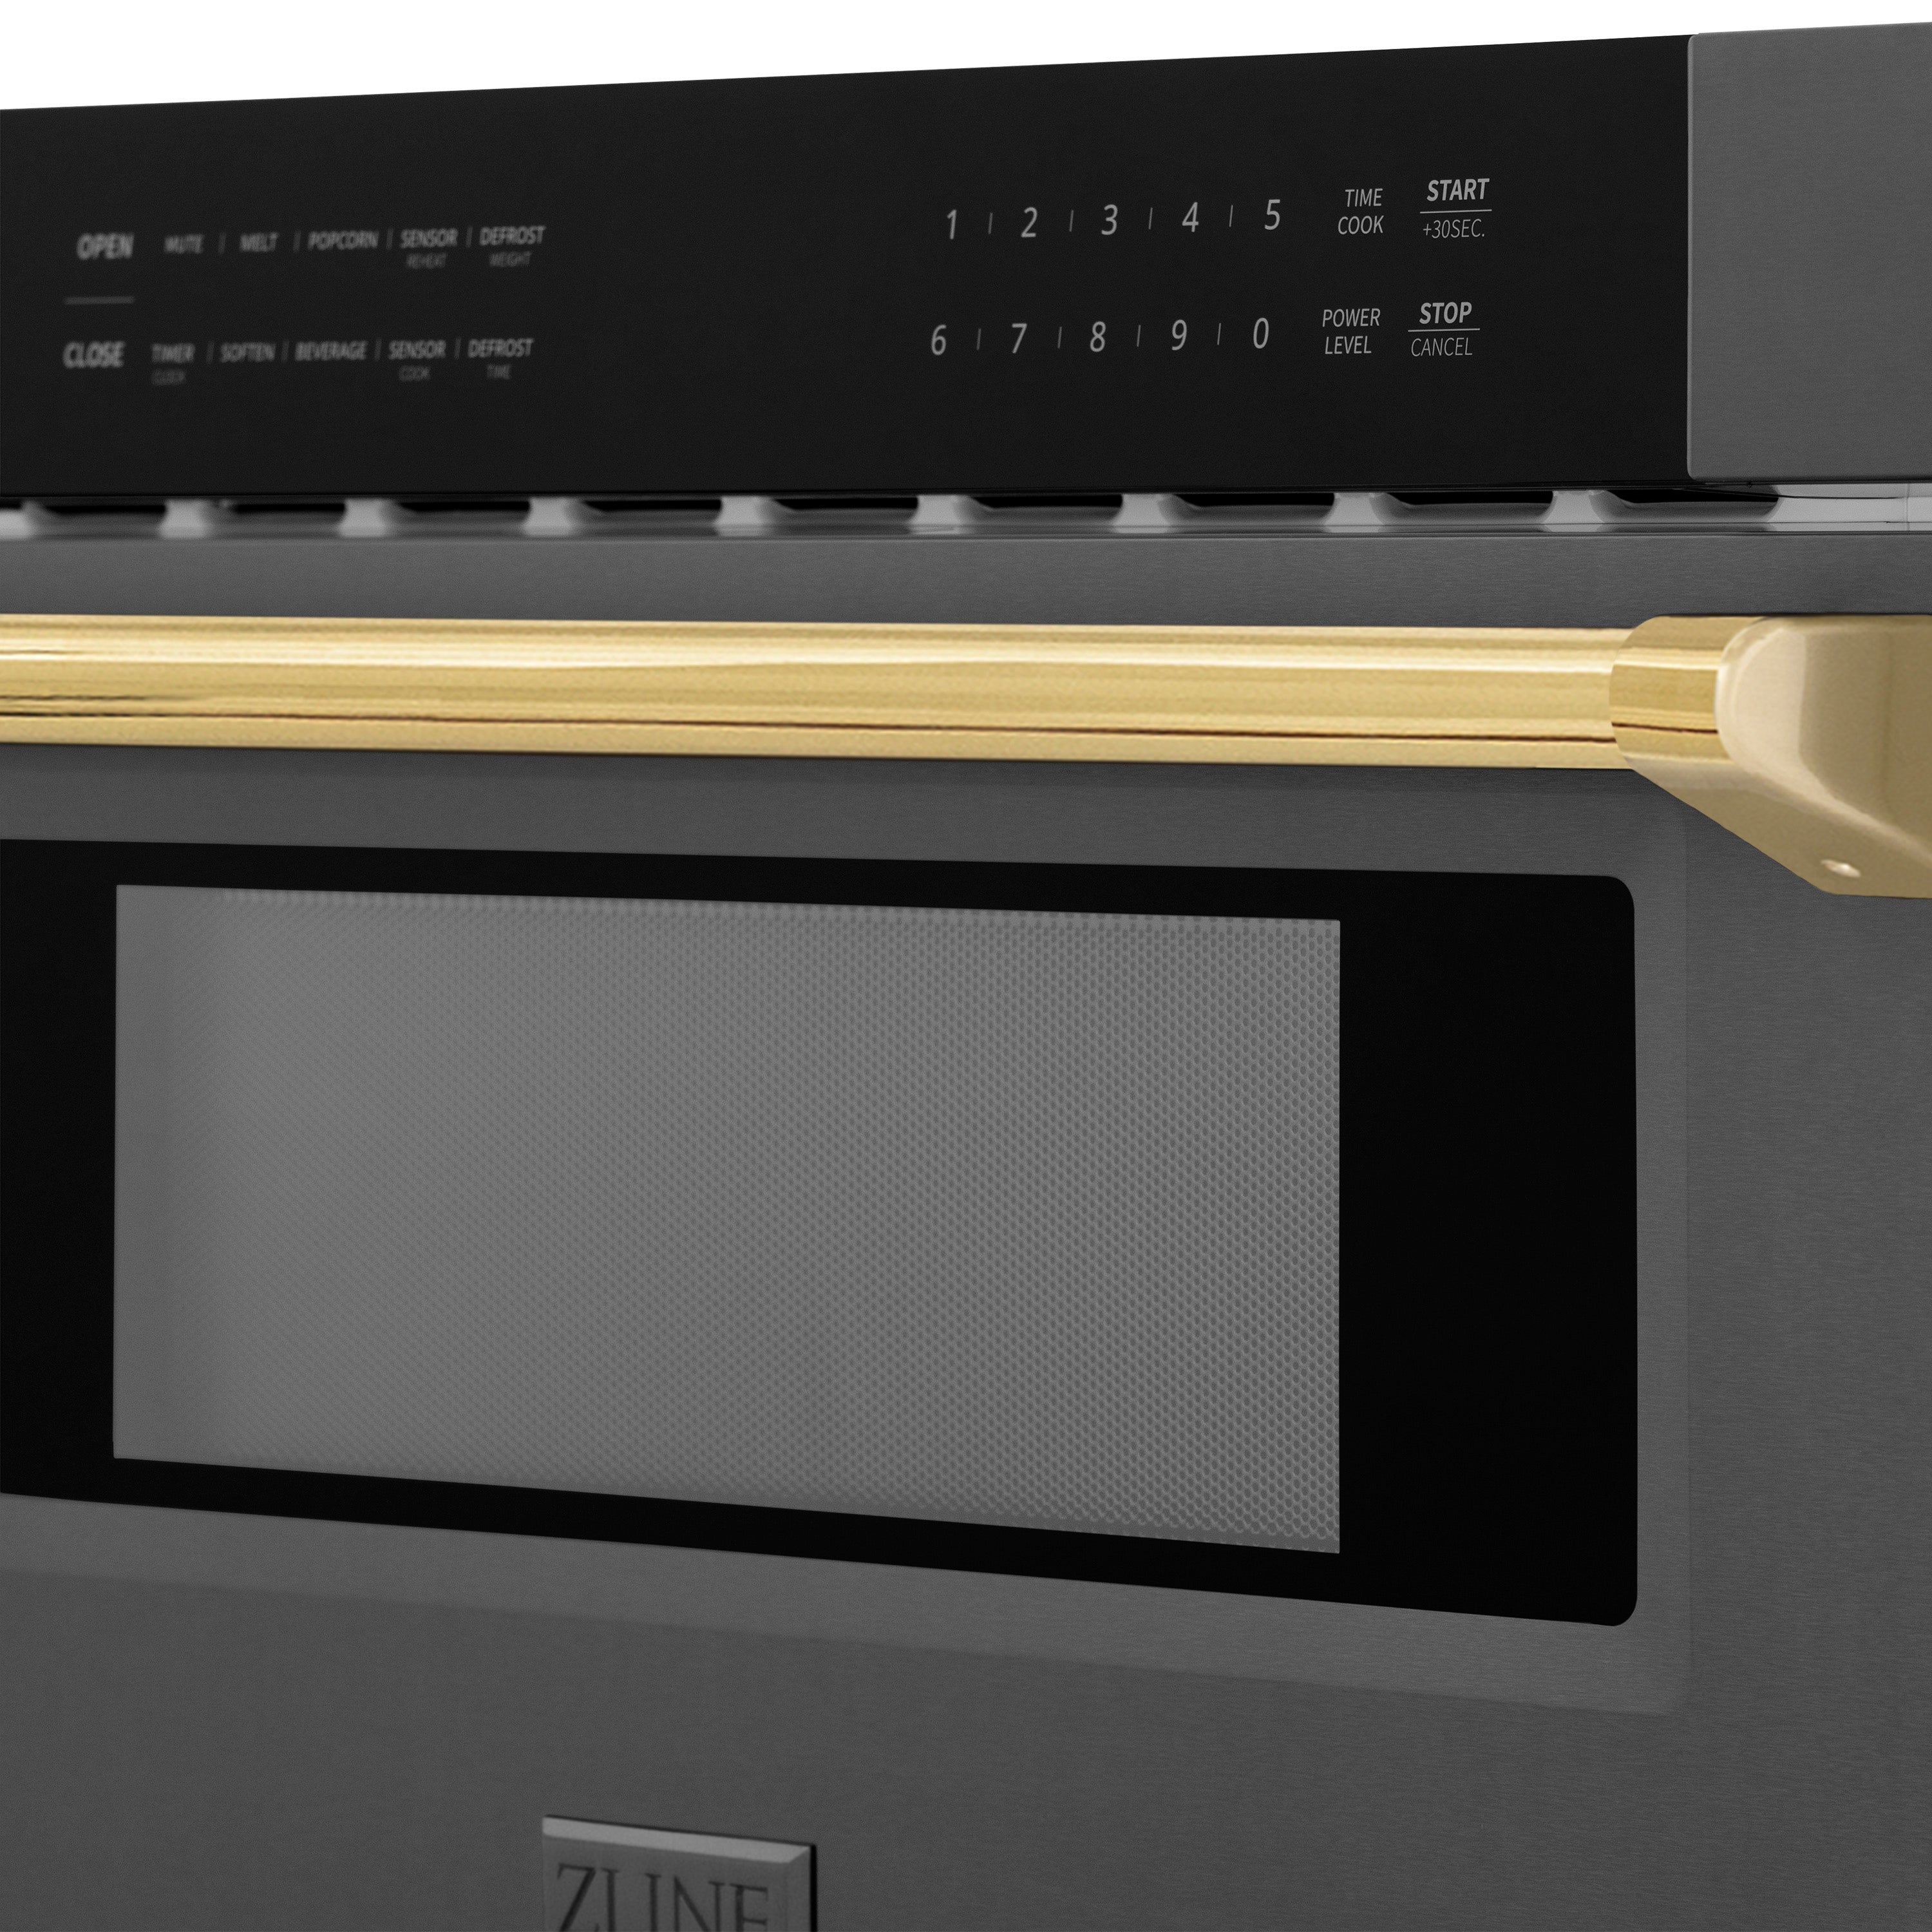 ZLINE Autograph Edition 30" 1.2 cu. ft. Built-in Microwave Drawer in Black Stainless Steel and Polished Gold Accents